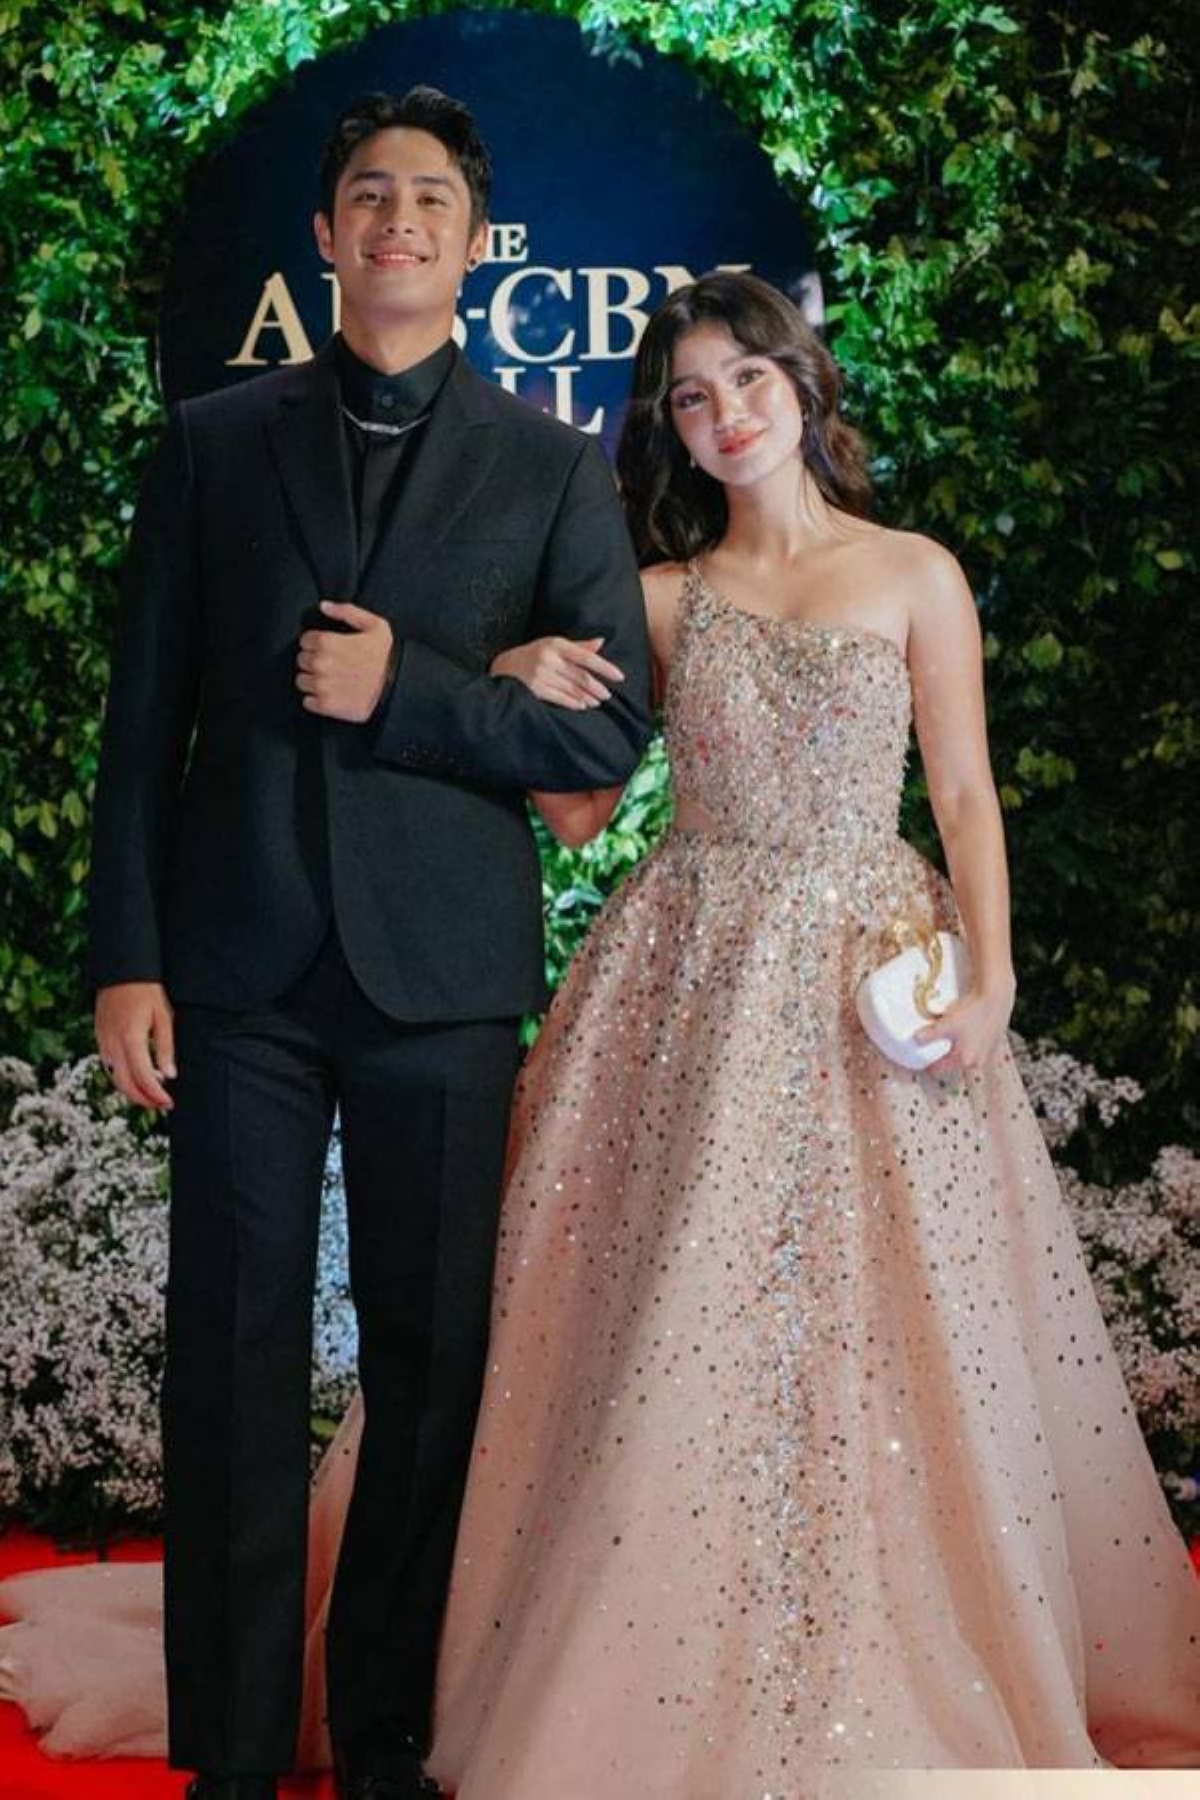 Belle Mariano in Michael Leyva with her on-screen partner Donny Pangilinan.